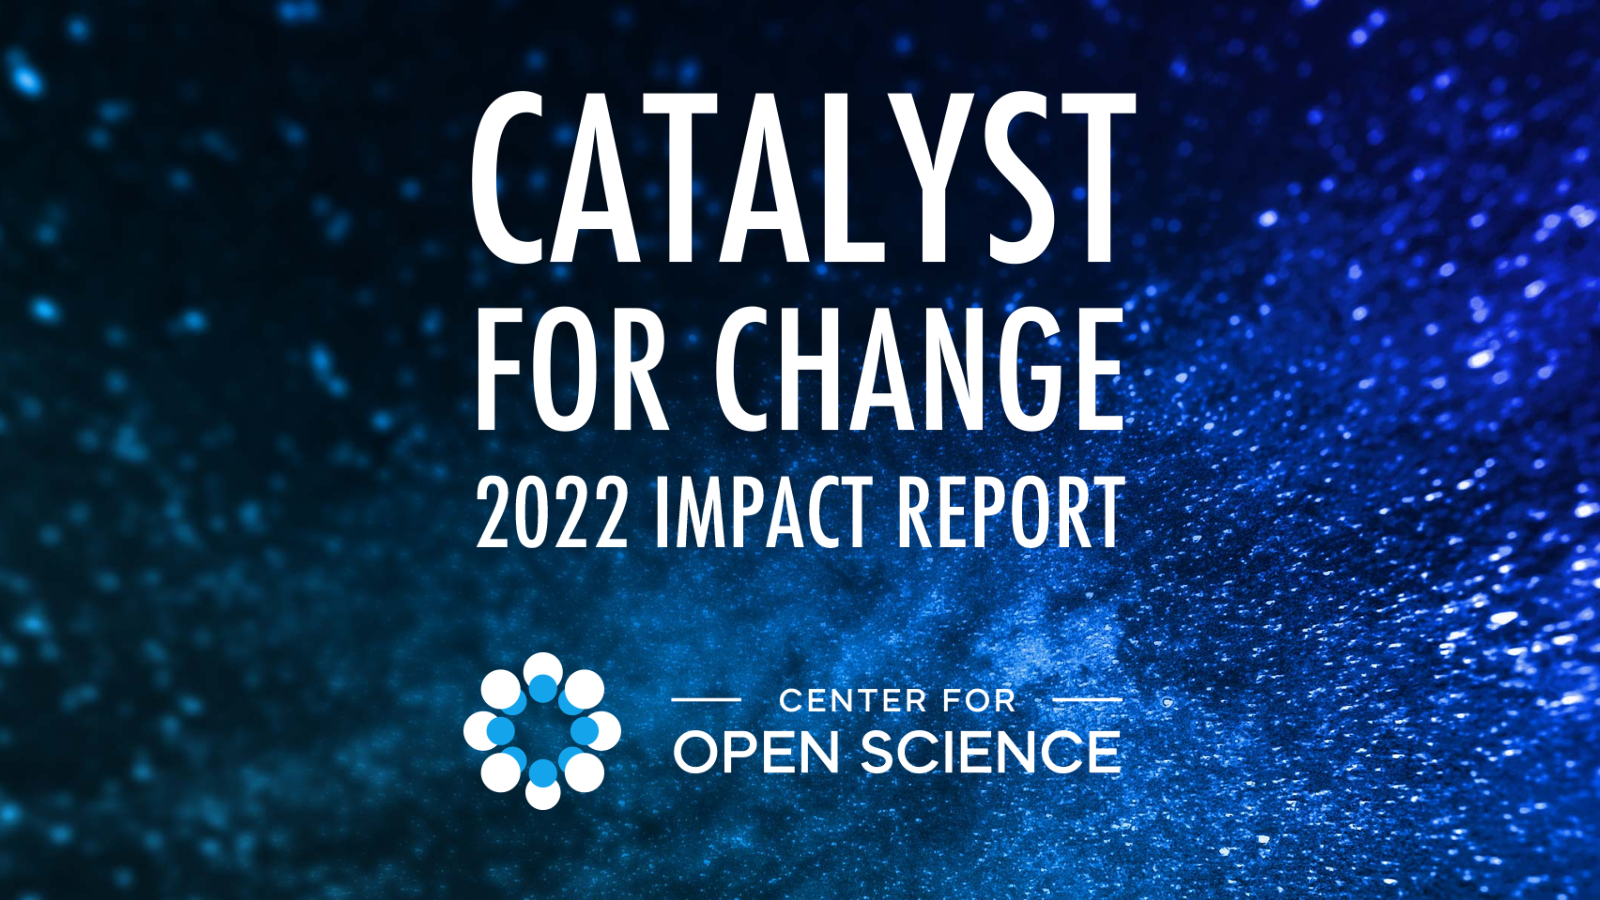 Text: Catalyst for Change: 2022 Impact Report